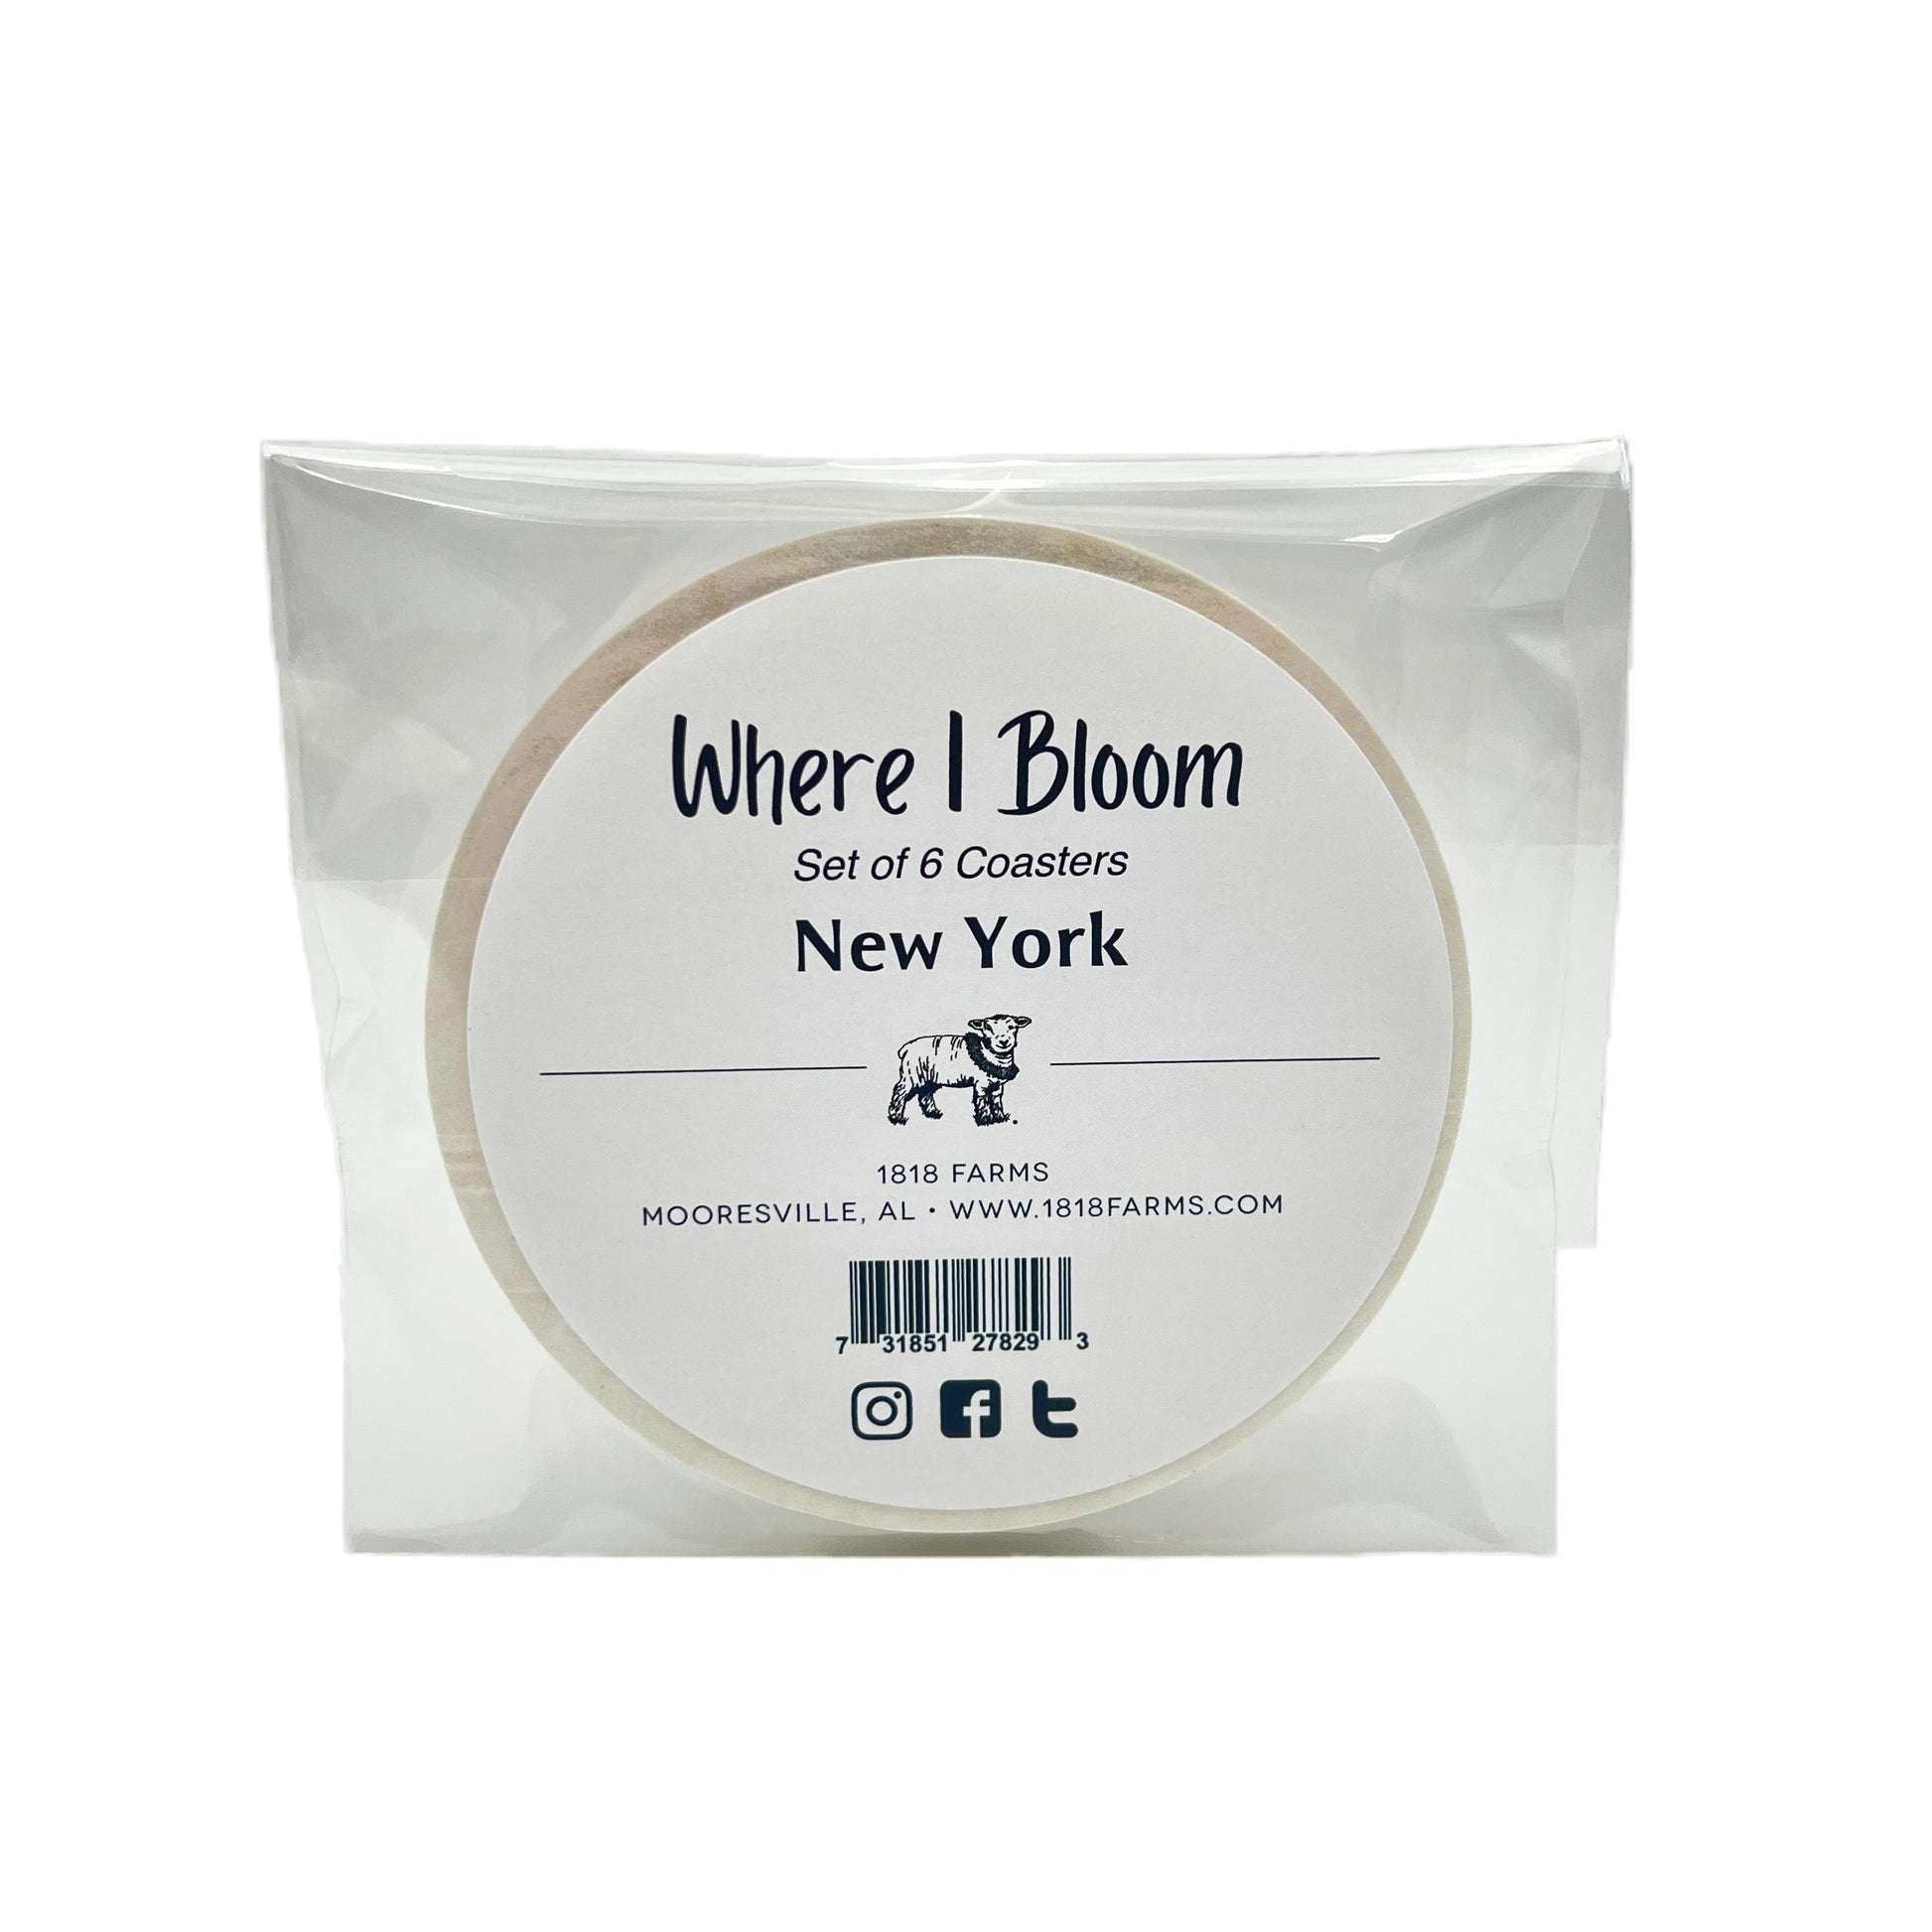 New York Themed Coasters (Set of 6)  - "Where I Bloom" Collection Coaster 1818 Farms   